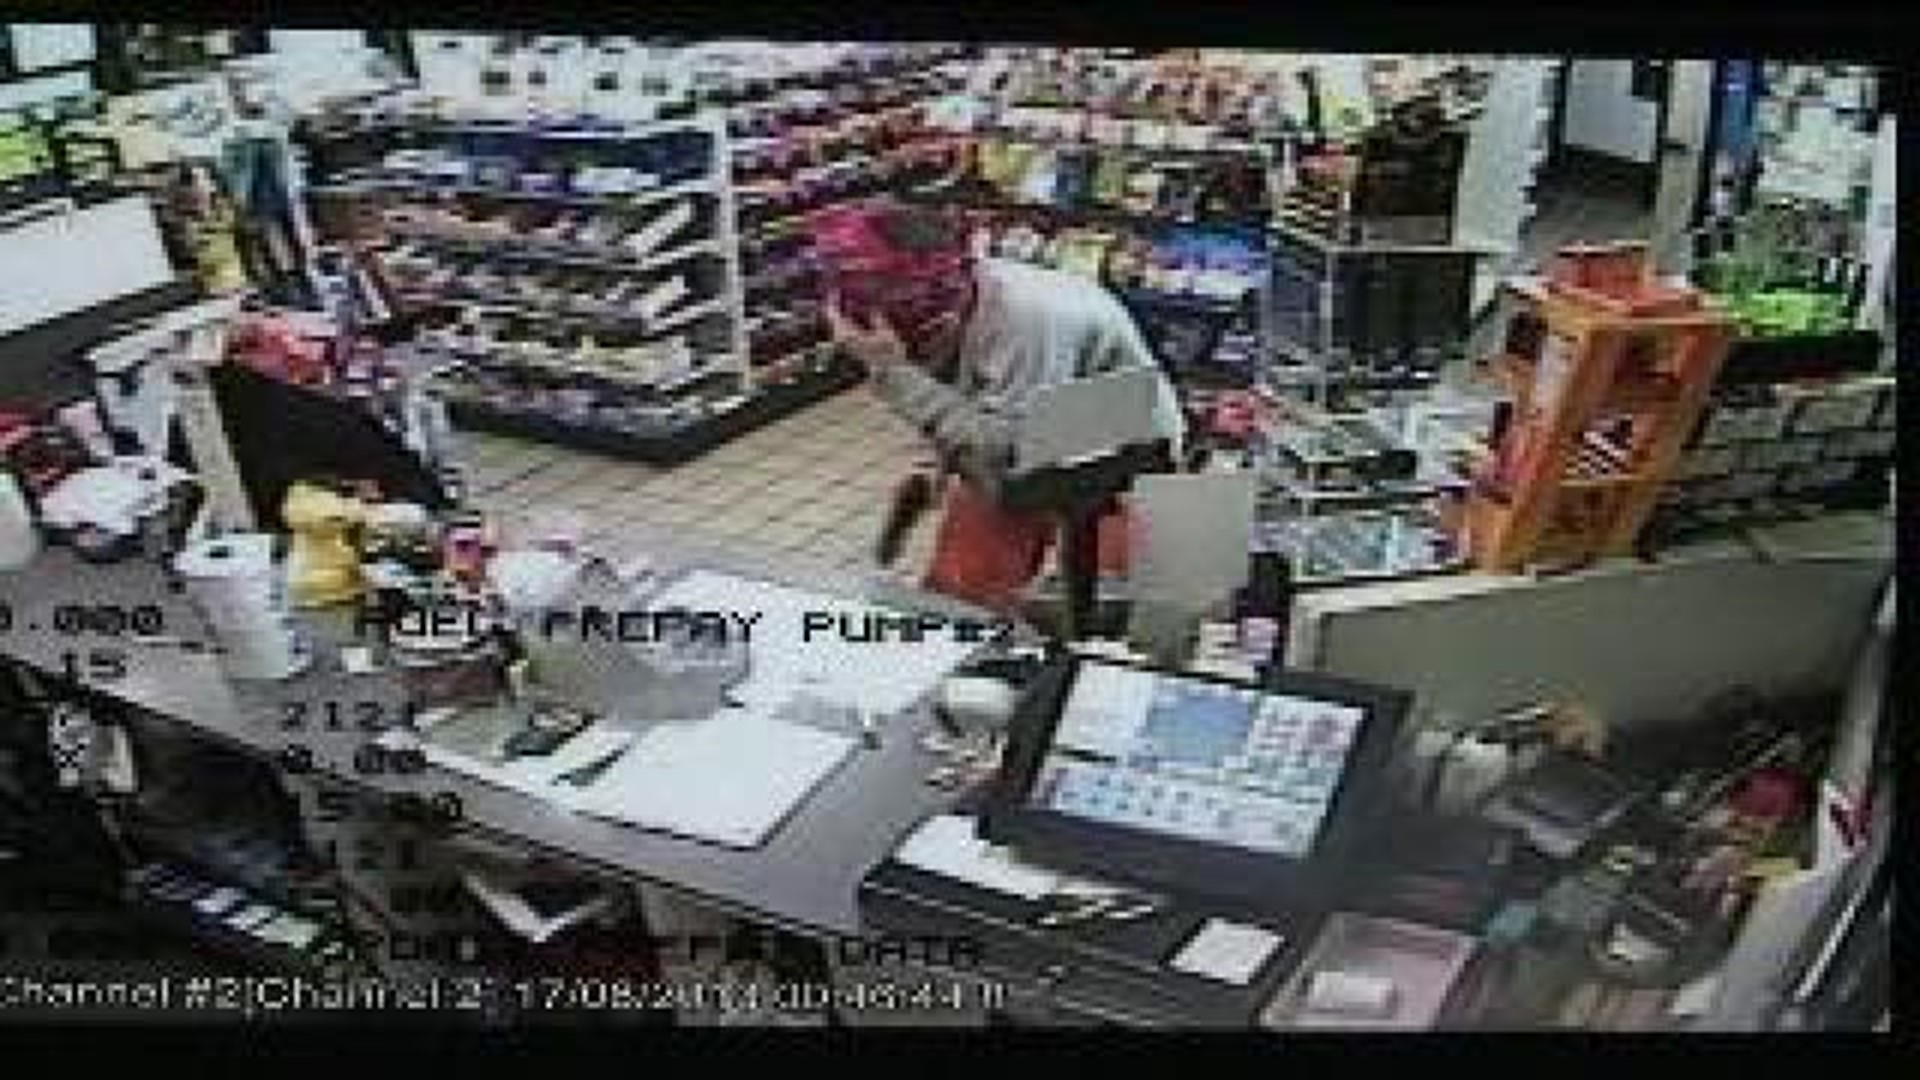 Tables Turned on Robbery Suspect, Surveillance Video Shows